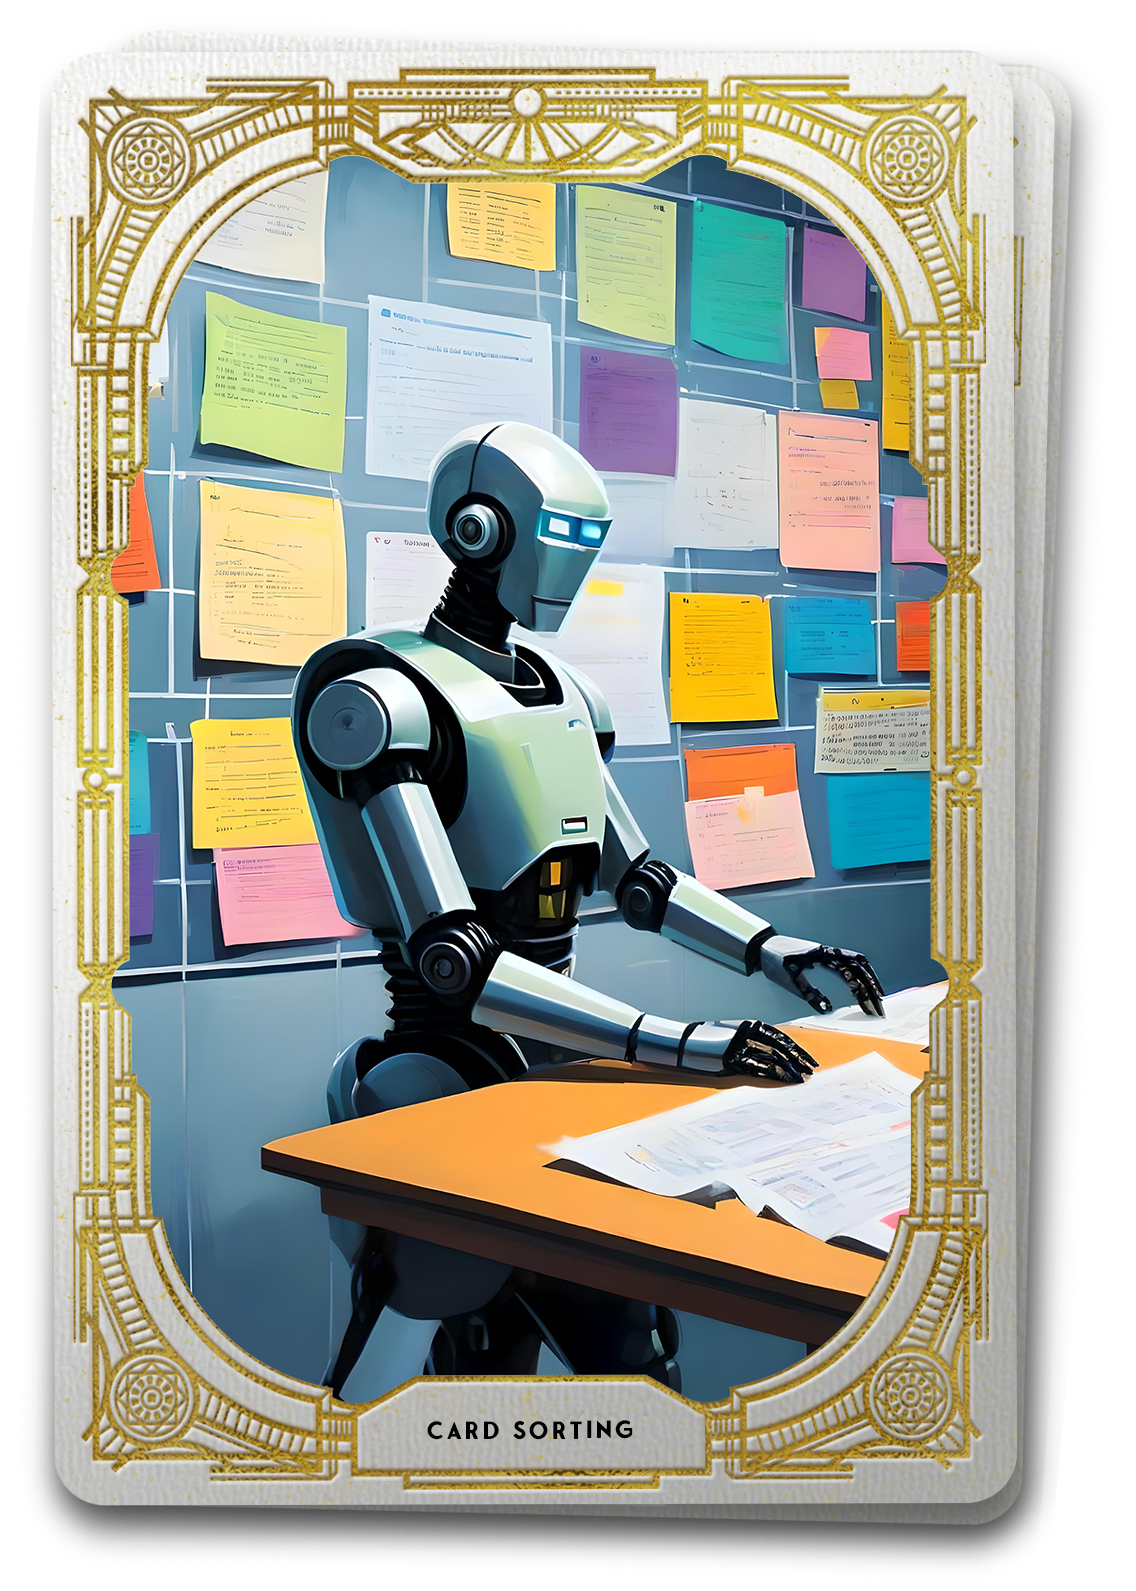 Tarot card featuring the image of a robot user creates an information architecture by organizing concepts into groups symbolic of the card sorting methodology in UX design.